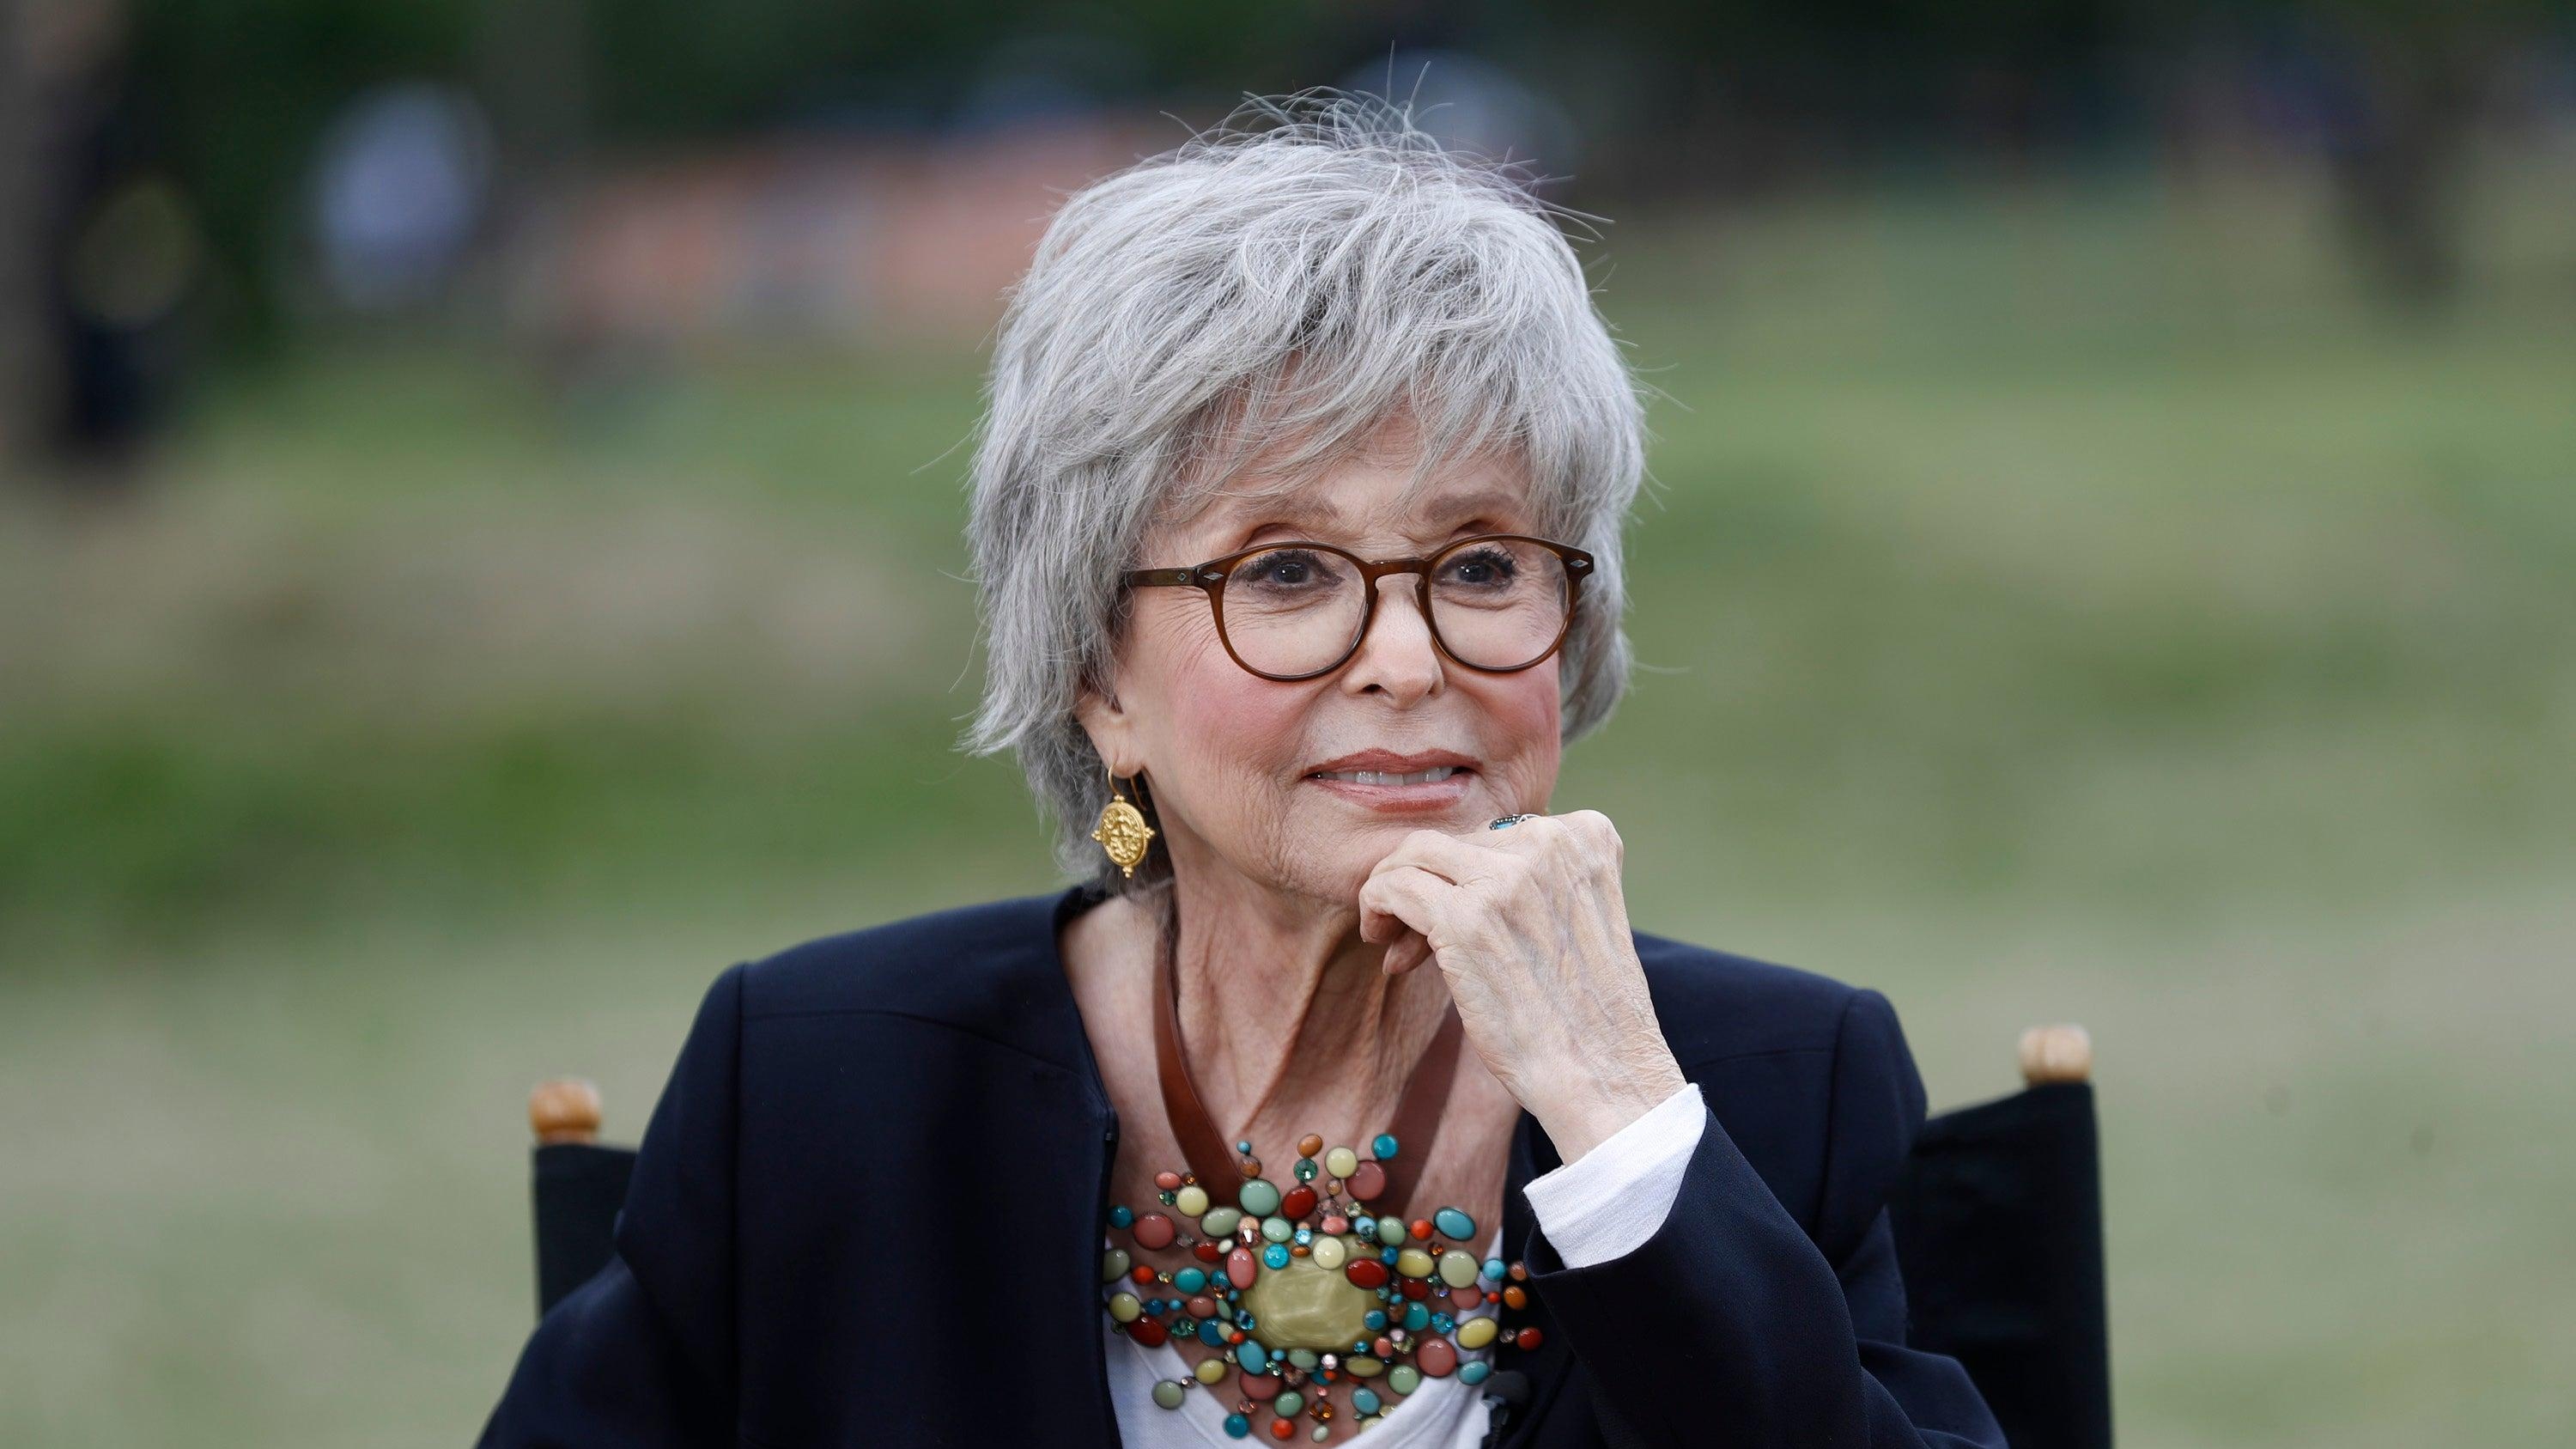 Rita Moreno says she's "incredibly disappointed" in herself over In The Heights comments